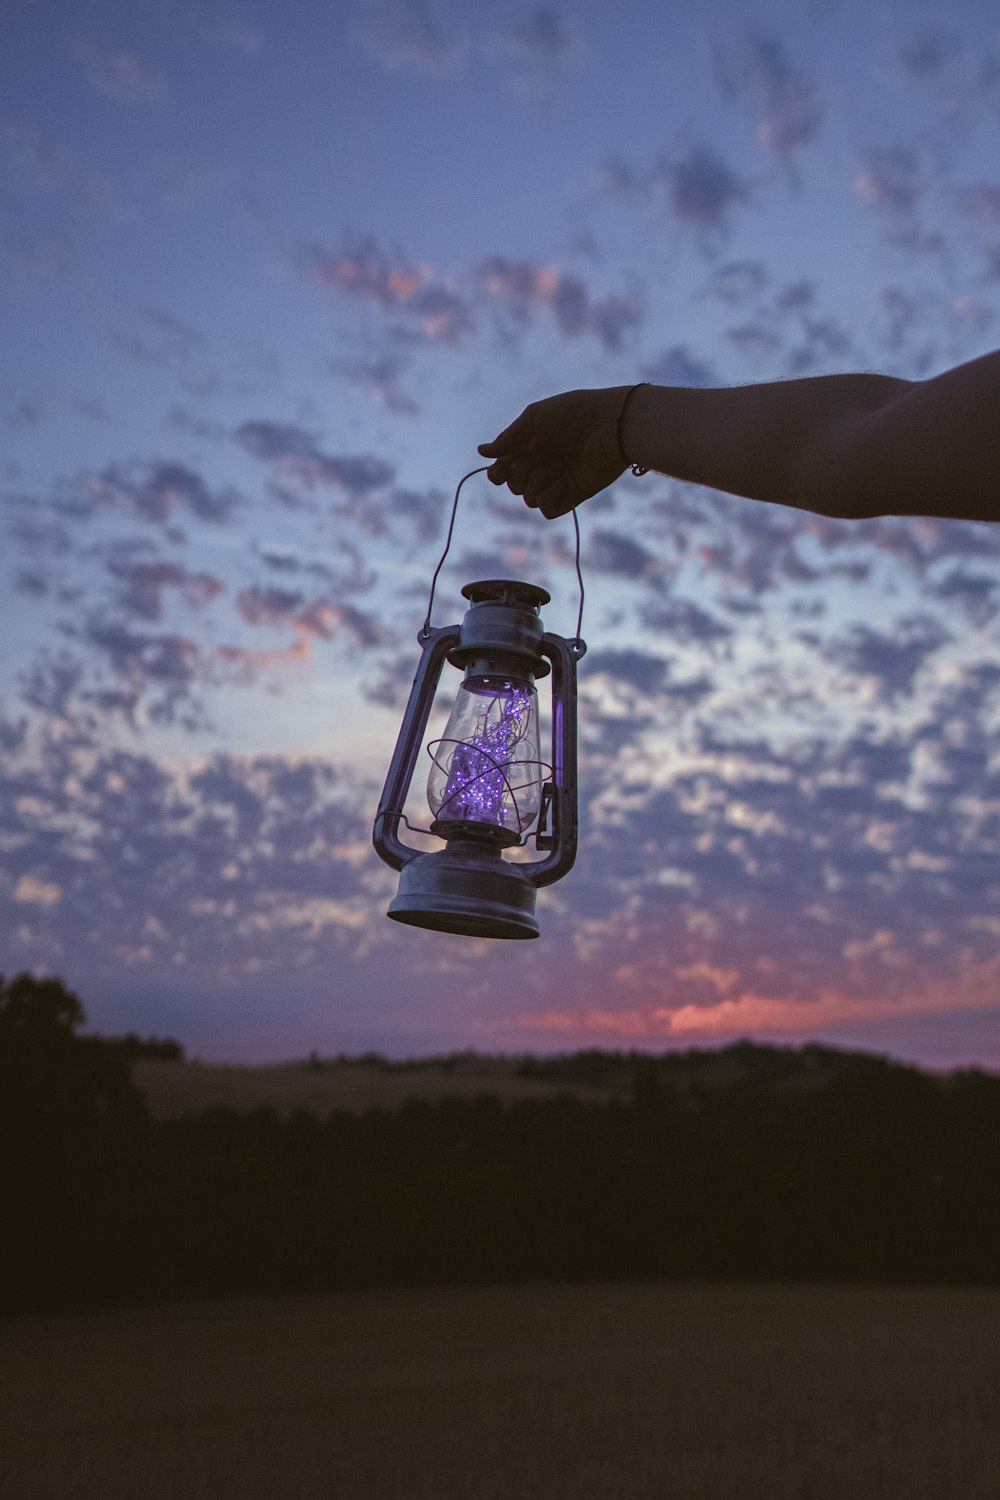 person holding clear glass jar with string lights during sunset